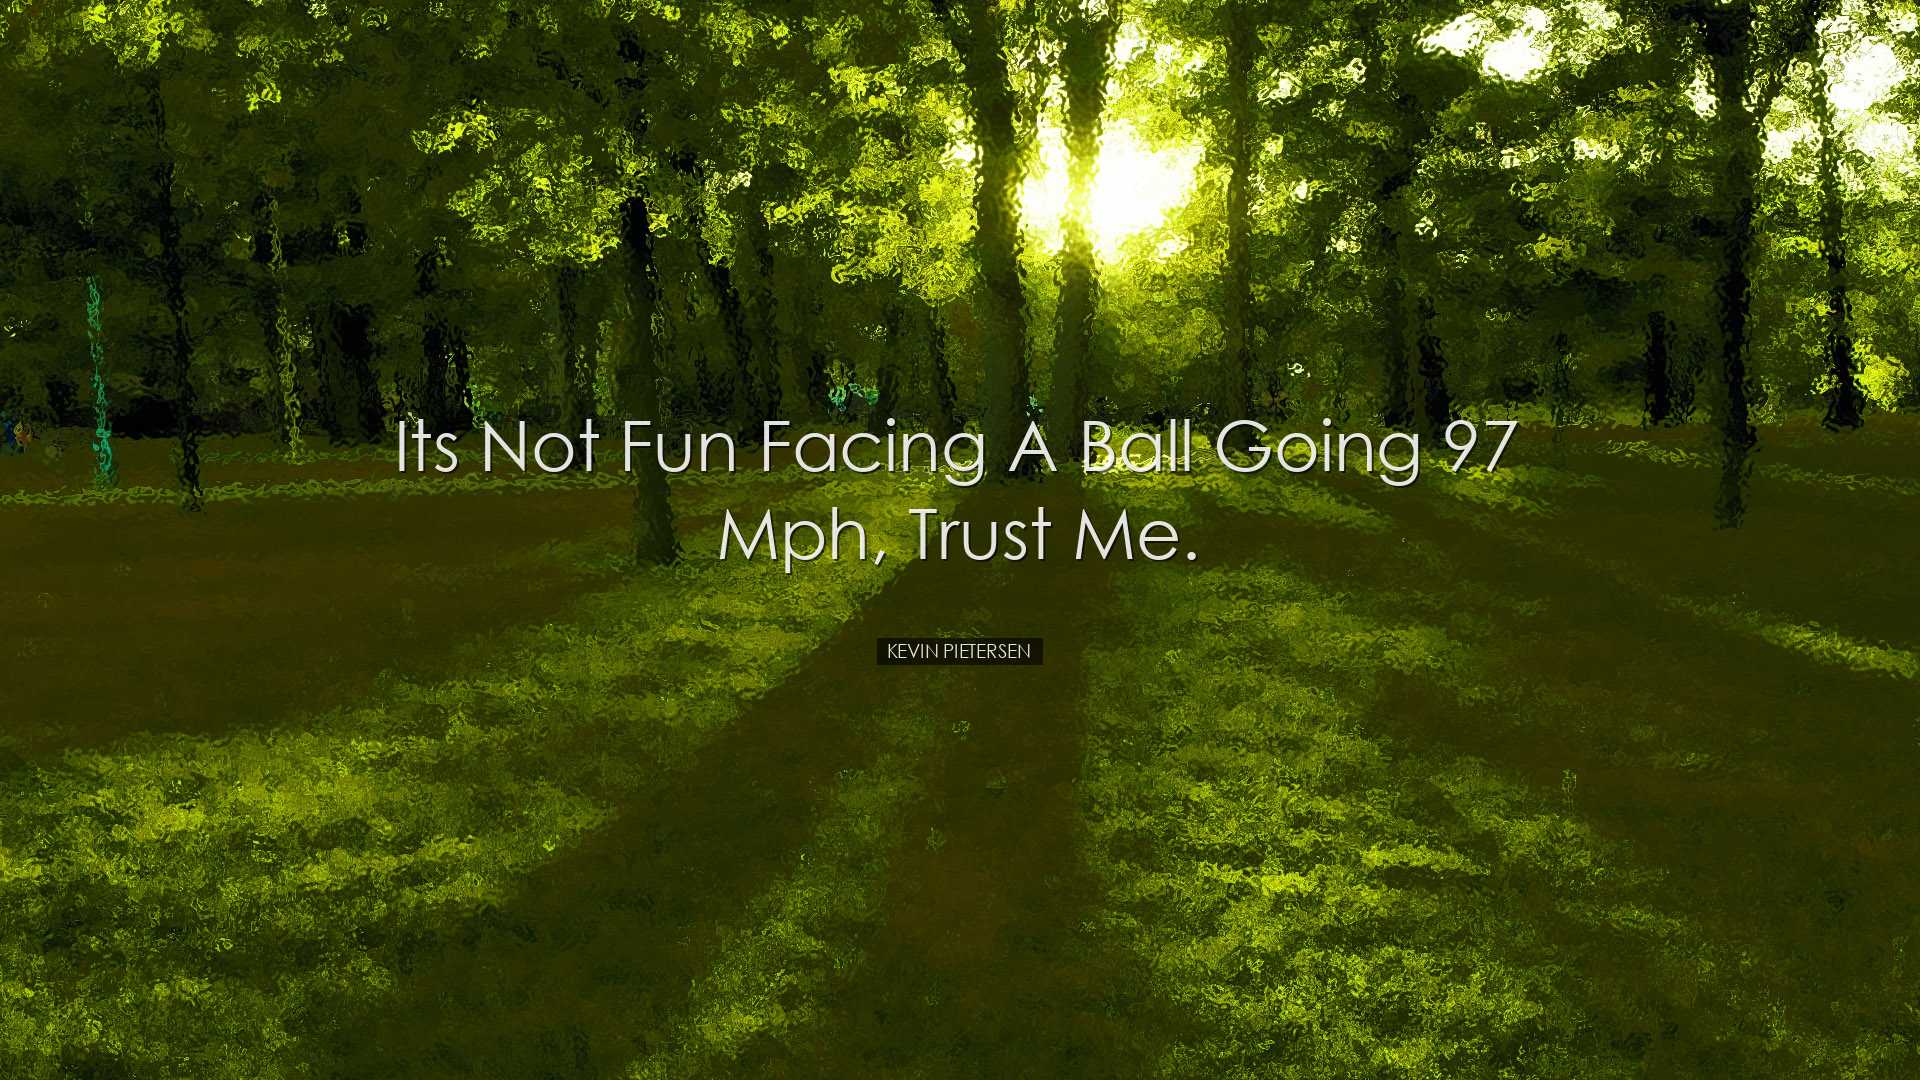 Its not fun facing a ball going 97 mph, trust me. - Kevin Pieterse